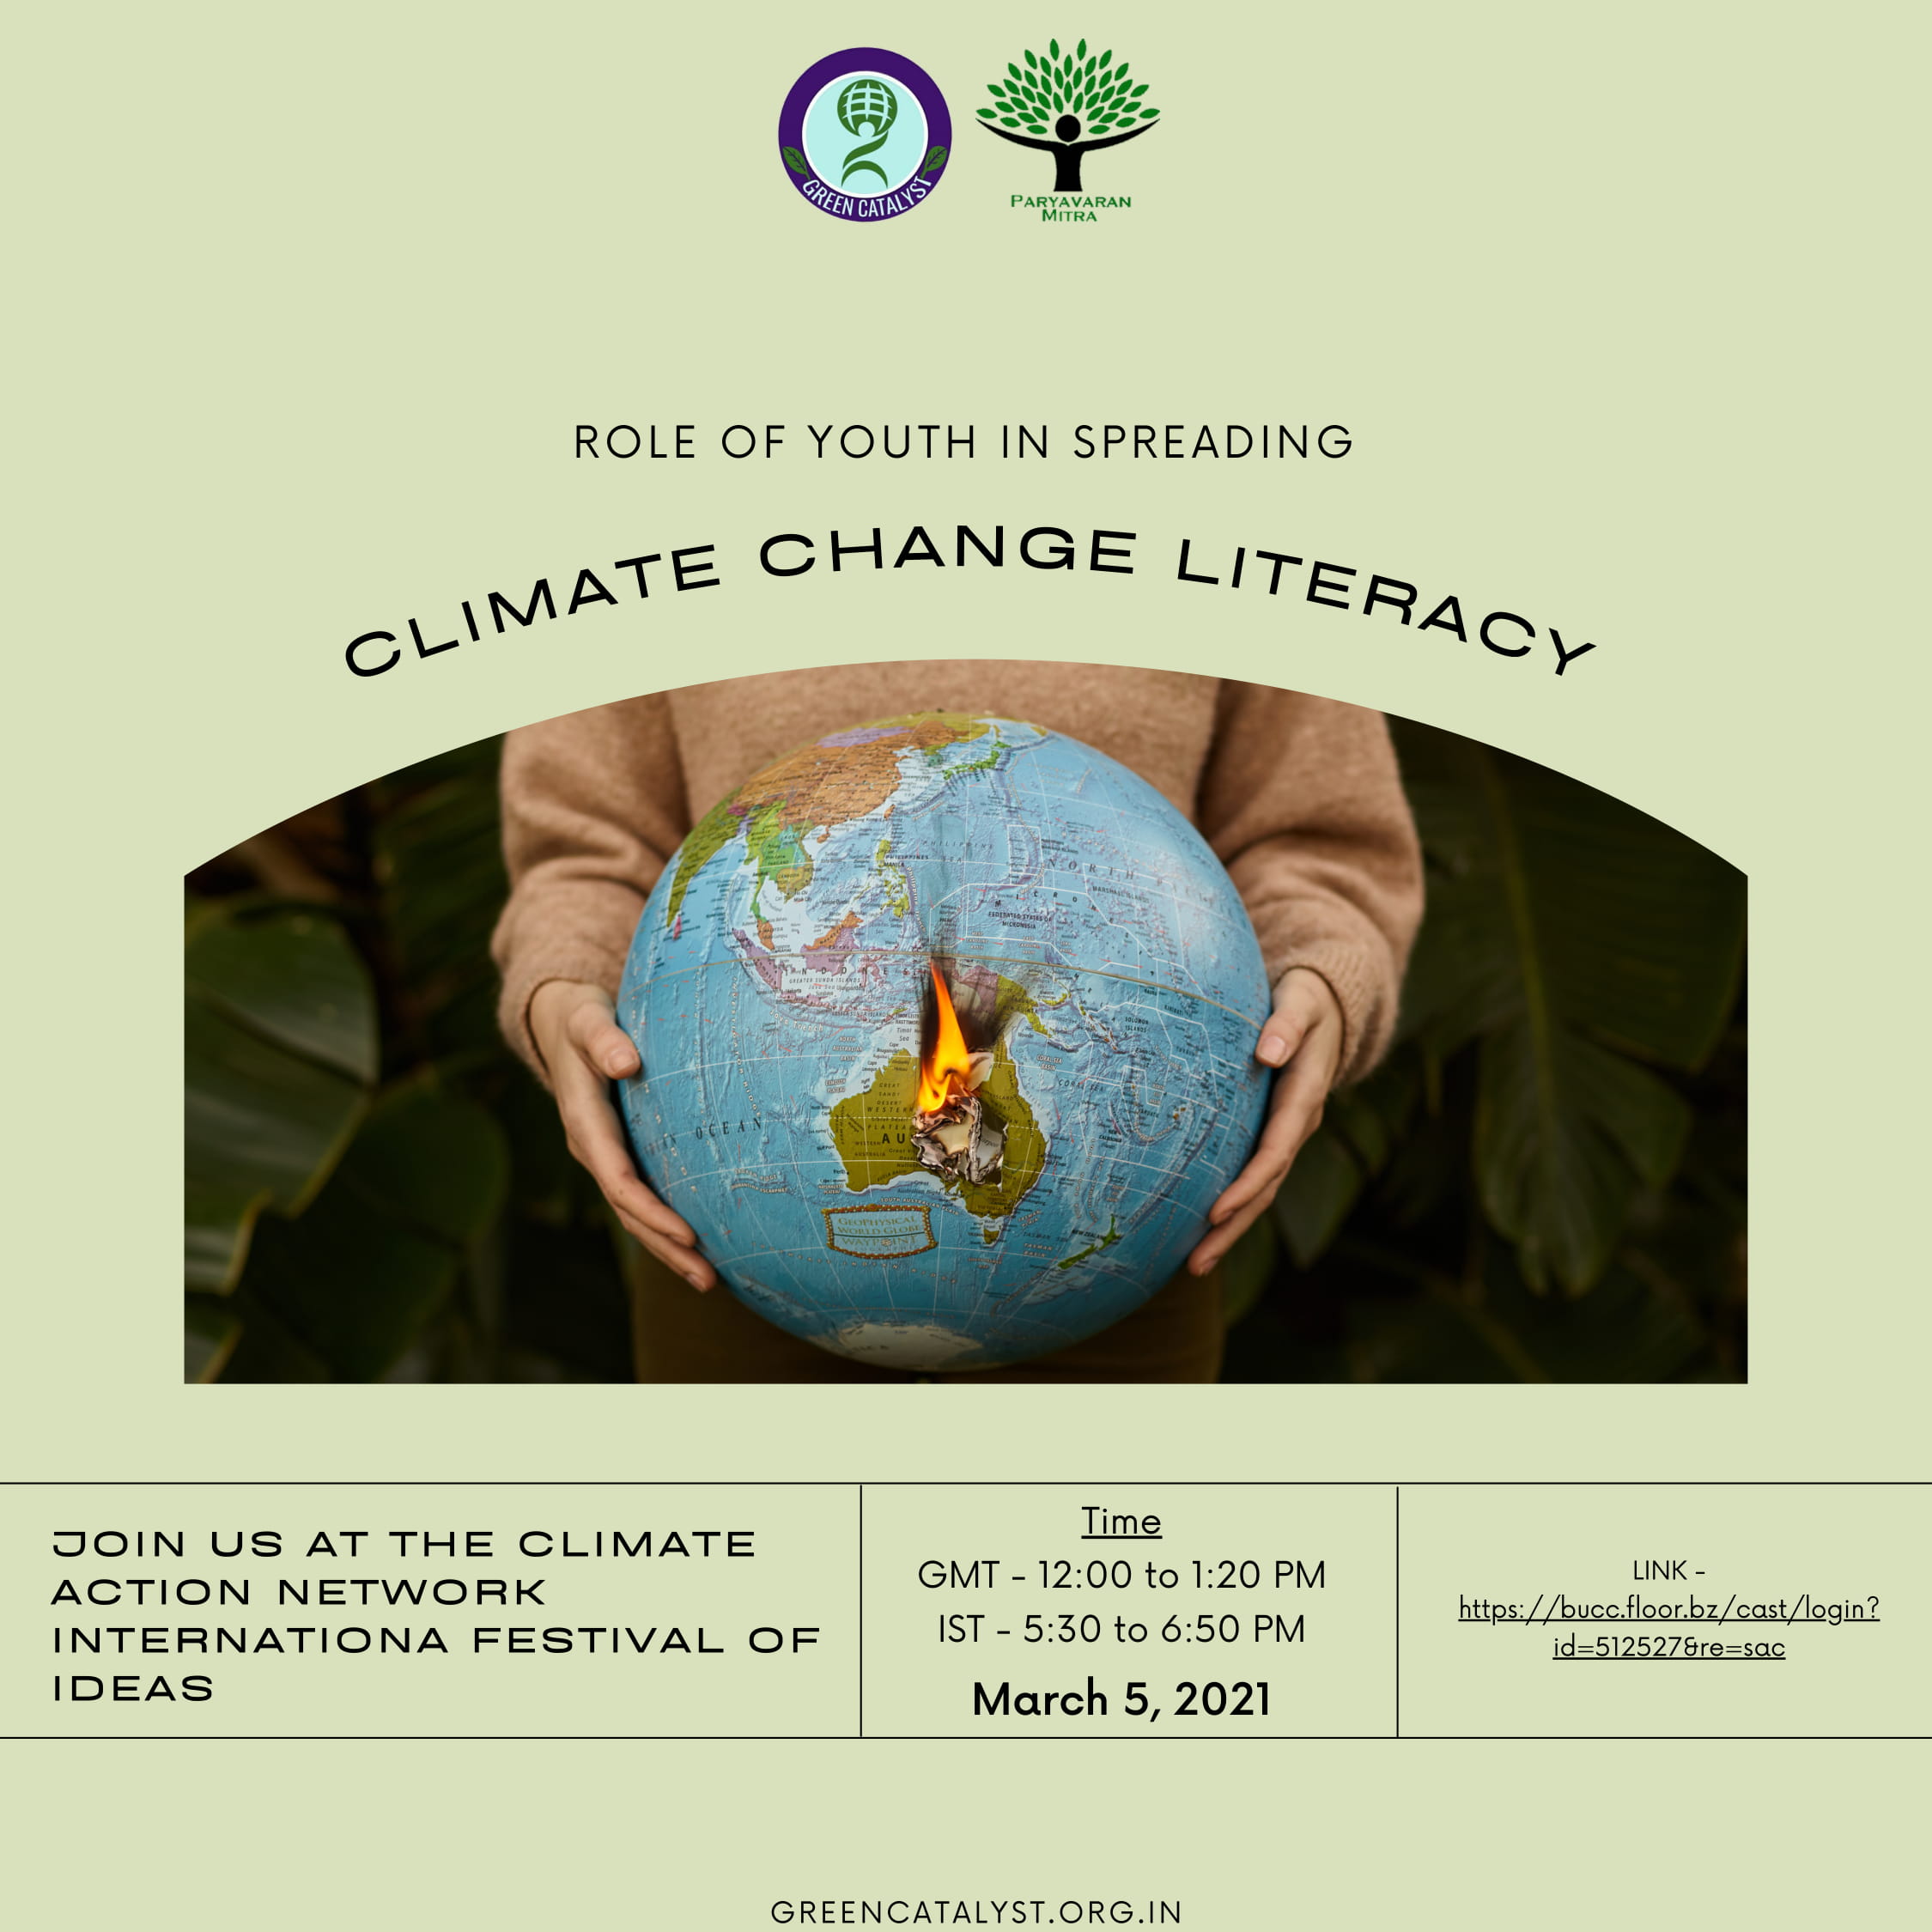 ROLE OF YOUTH IN SPREADING CLIMATE CHANGE LITERACY